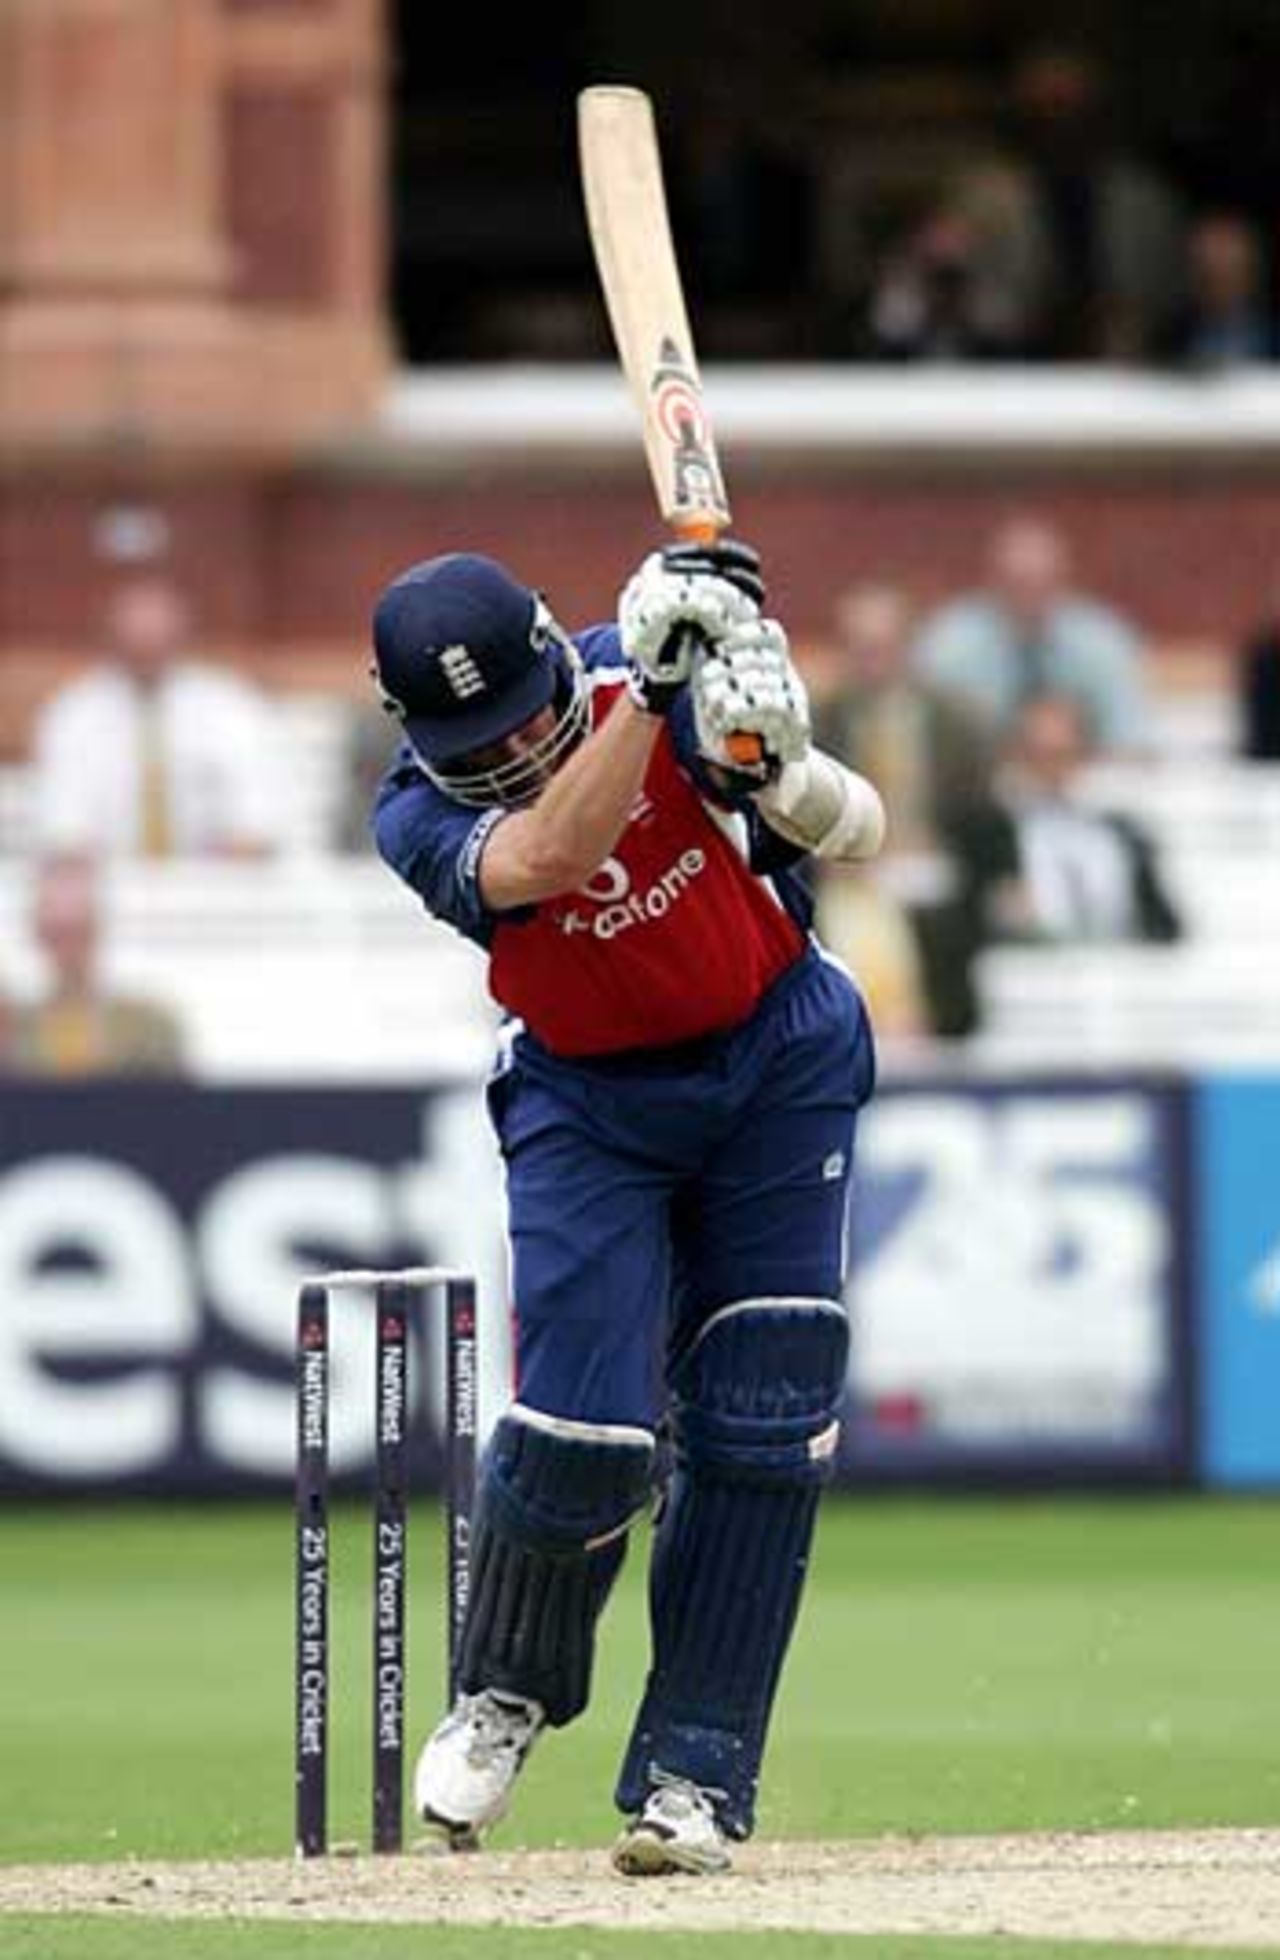 Ashley Giles faces the last ball of England's innings as they get two runs to tie, England v Australia, NatWest Series final, Lord's, July 2